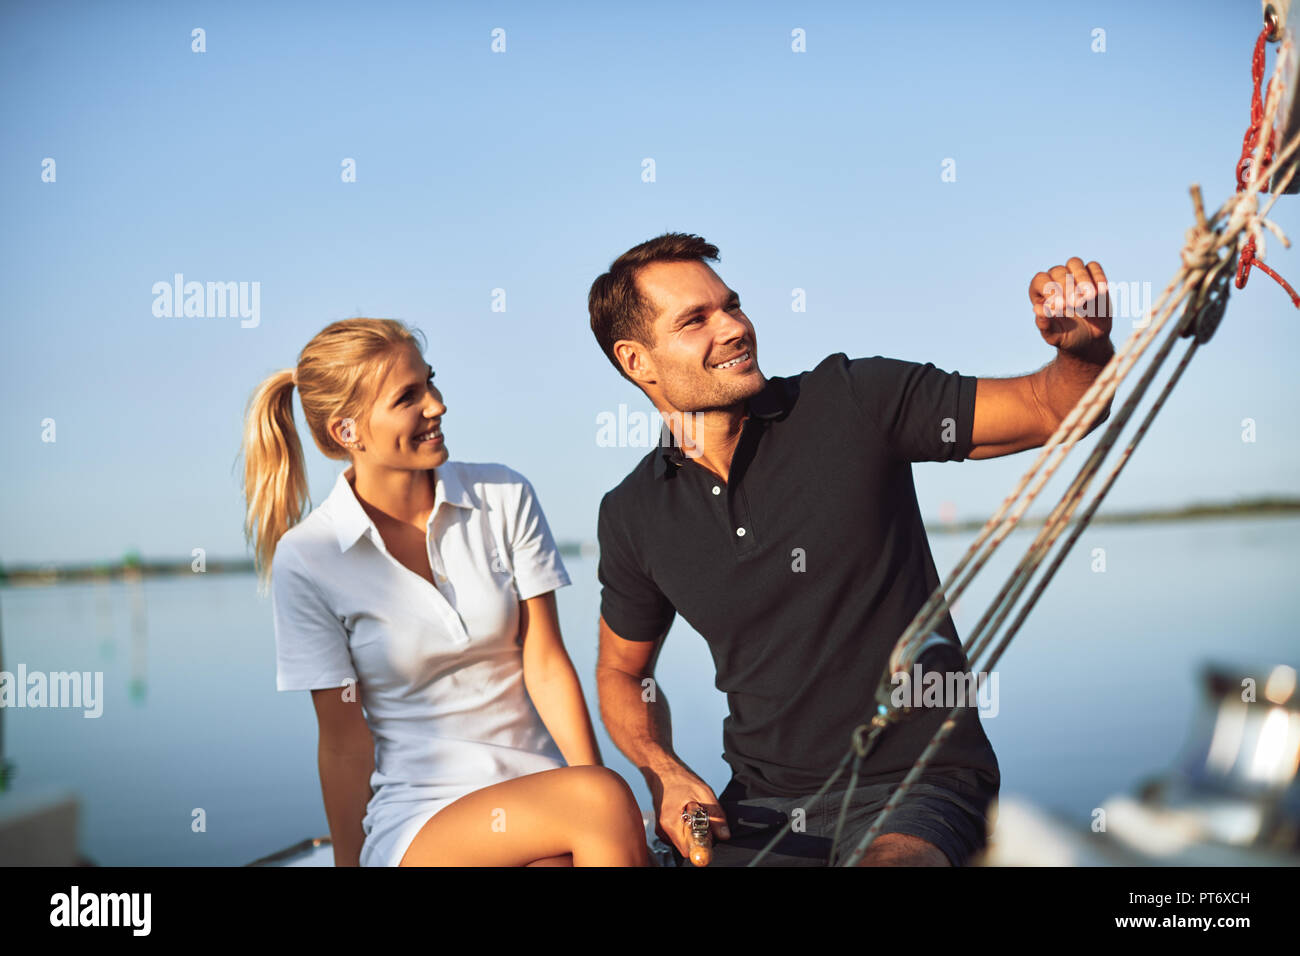 Smiling young couple enjoying an afternoon sailing together while sitting on the deck of their yacht Stock Photo